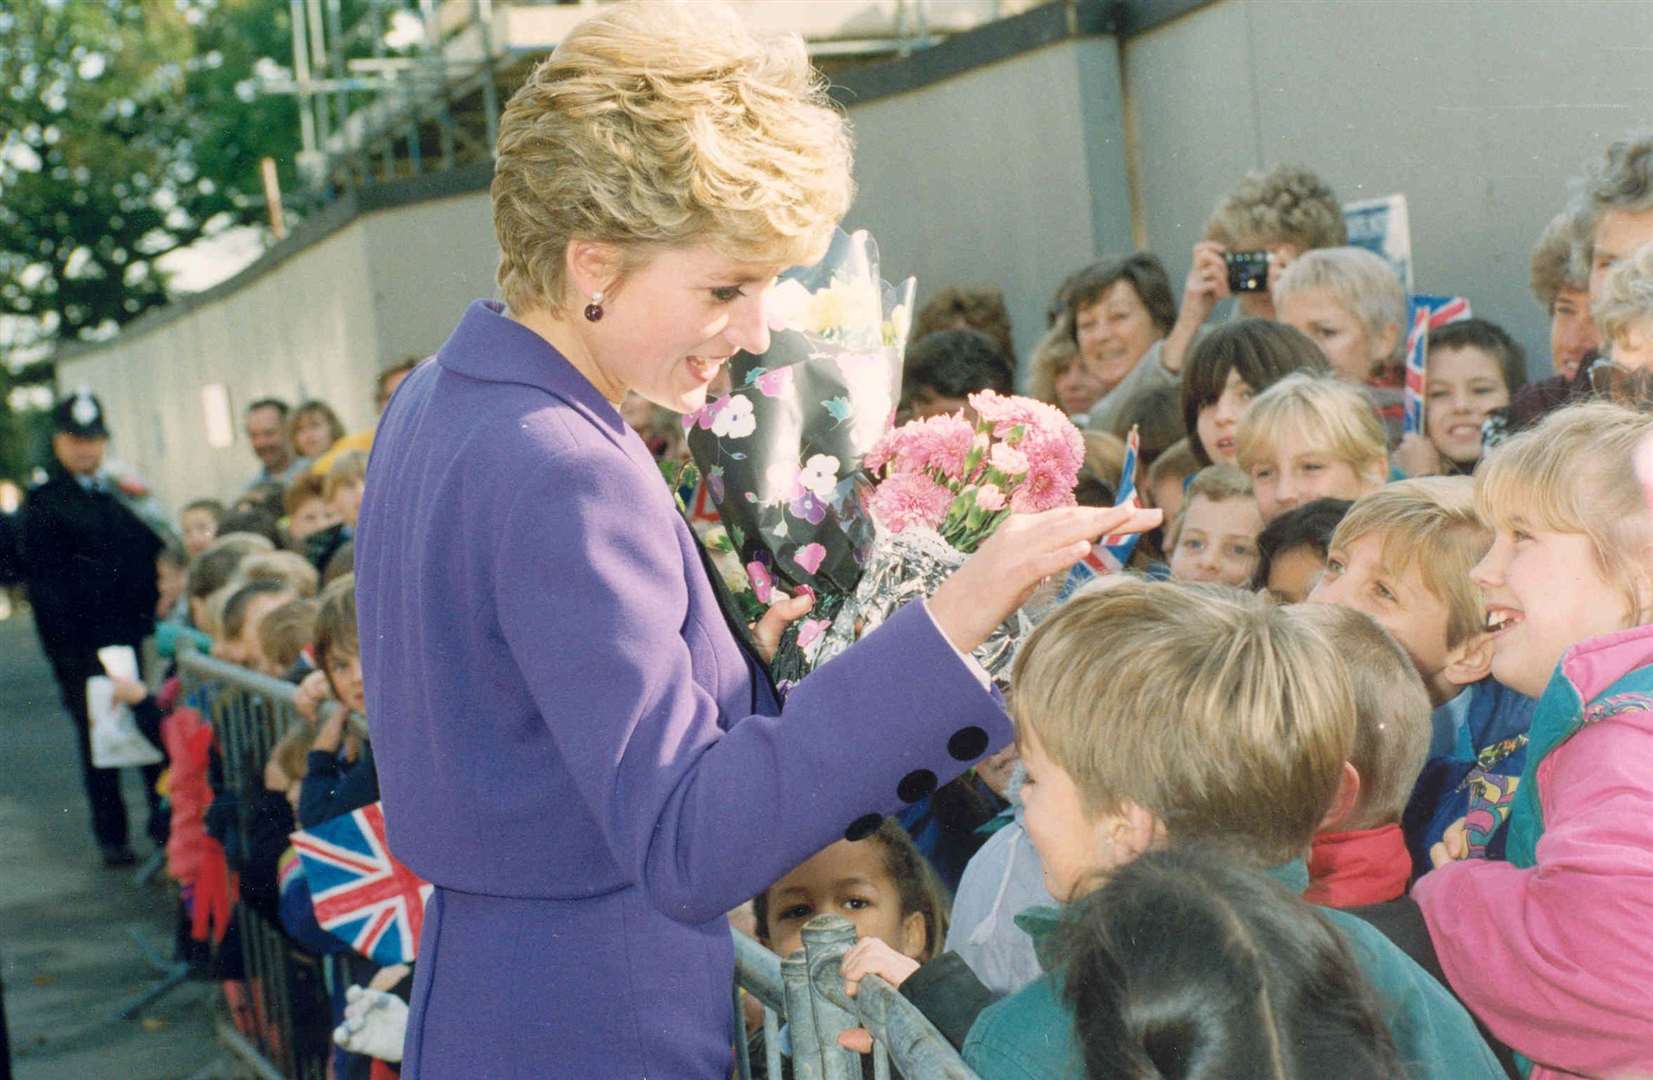 Pupils at St Peter's School, Aylesford got their reward after waiting two hours to greet Princess Diana outside the Heart of Kent Hospice in 1992